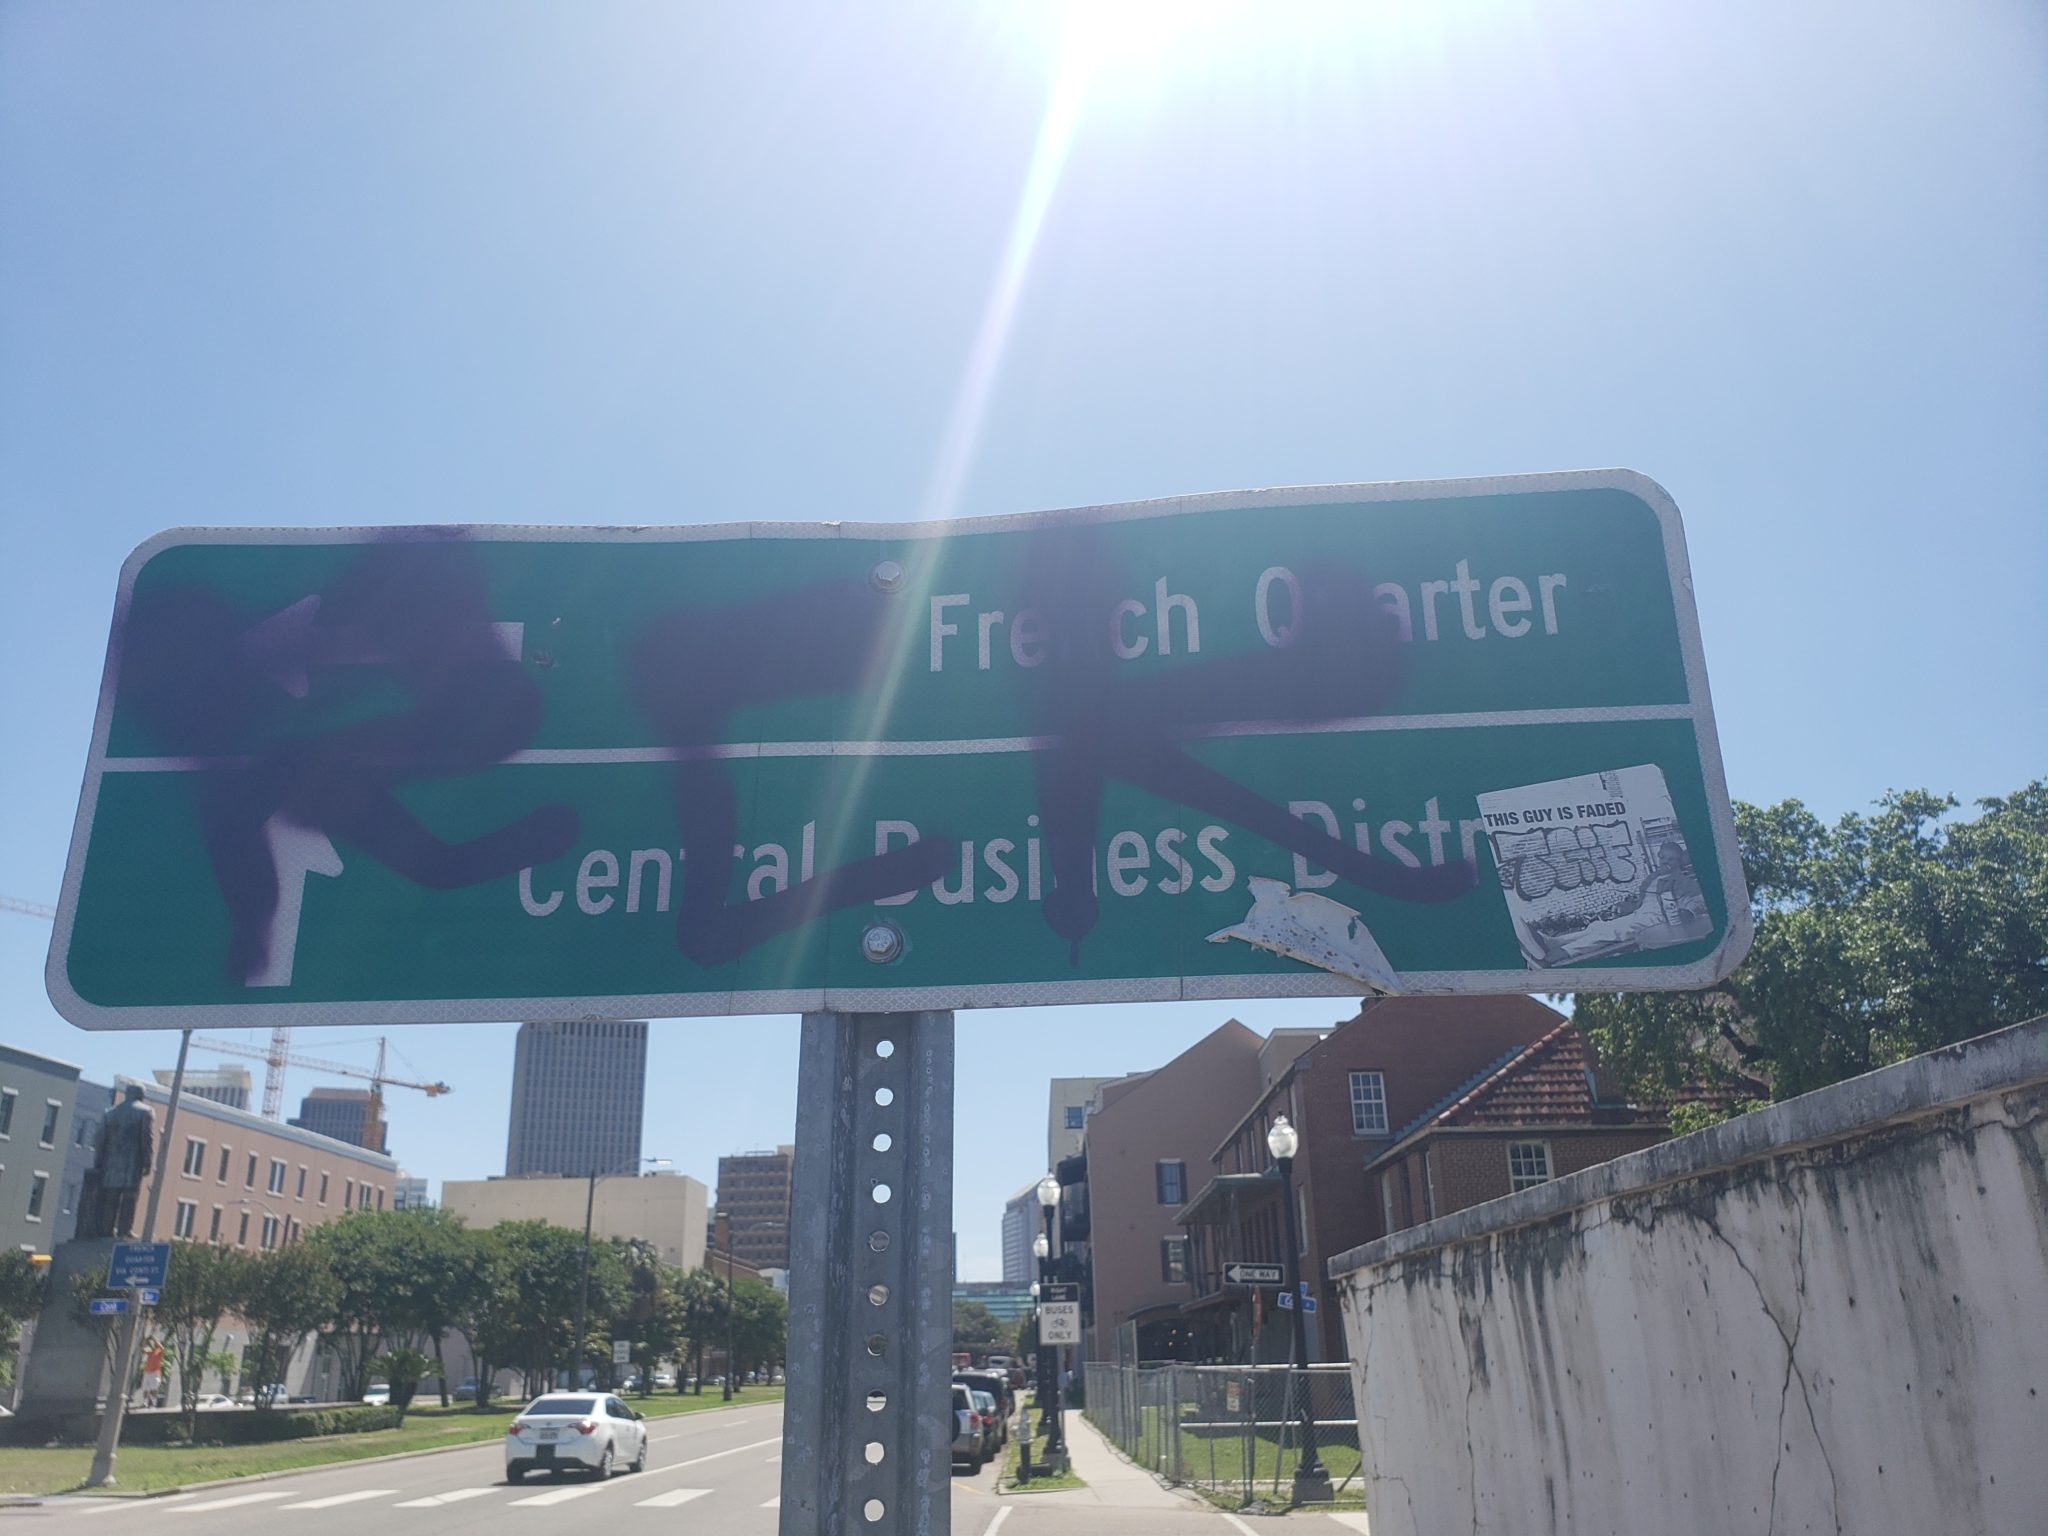 a street sign with graffiti on it